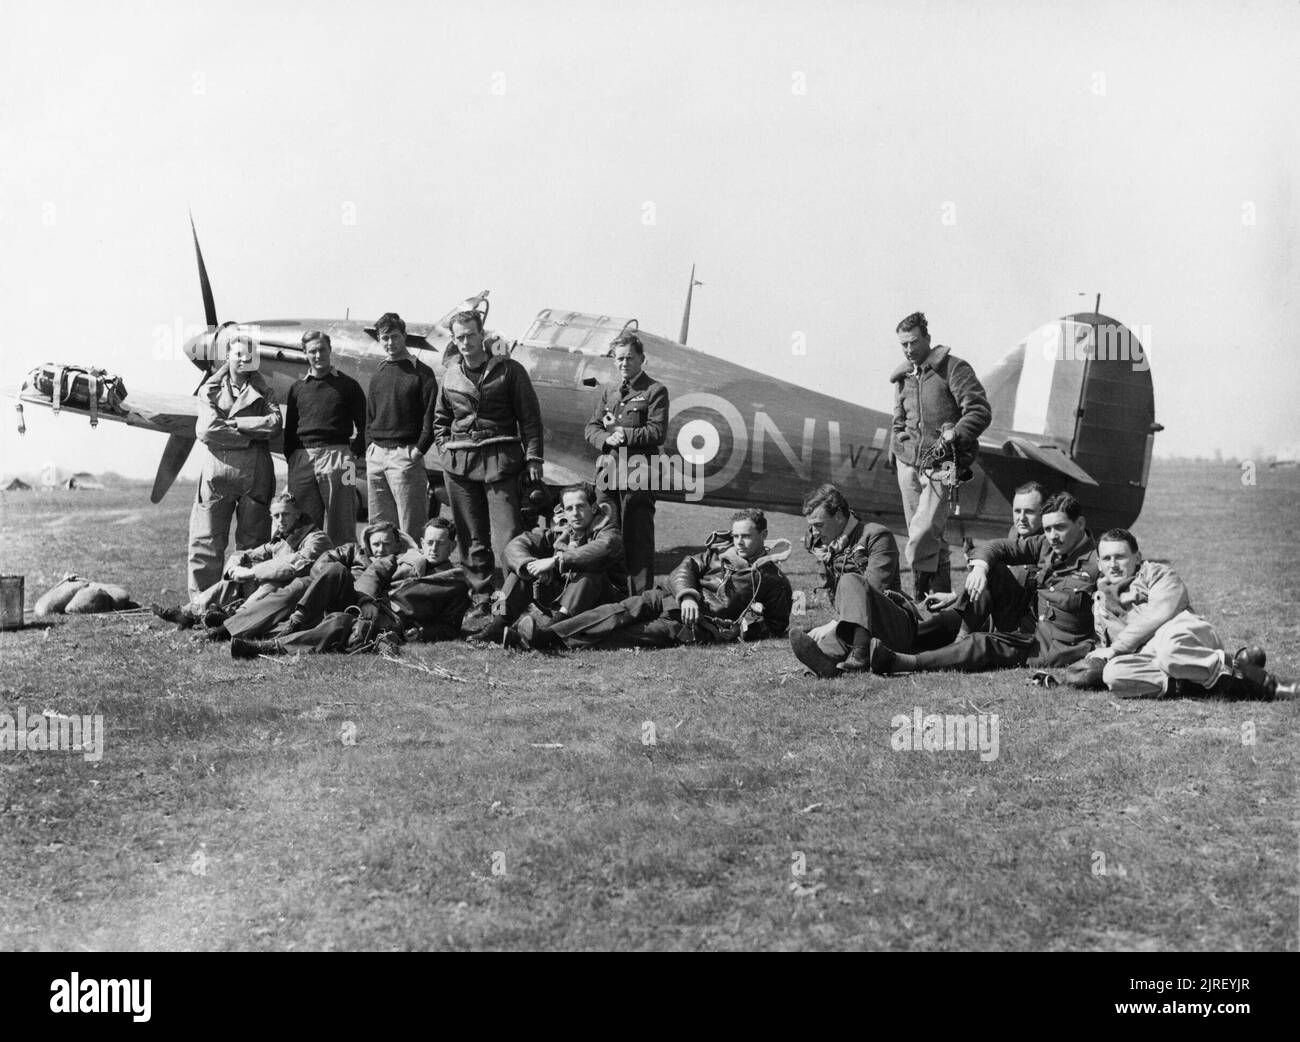 Royal Air Force Operations Over Albania and Greece, 1940-1941. Pilots of No. 33 Squadron RAF, at Larissa, Greece, with Hawker Hurricane Mark I, V7419, in background. Standing (left to right); Pilot Officers W Winsland, R Dunscombe (p.o.w 22 May 41), C A C Chetham (k.i.a. 15 April 41), and P R W Wickham, Flying Officers D T Moir and H J Starrett (died of burns 22 April 41): sitting (left to right); Flying Officer E J 'Timber' Woods (k.i.a. 17 June 41), Flying Officer F Holman (k.i.a. 20 May 41), Flight Lieutenant A M Young, Flying Officer V C 'Woody' Woodward, Squadron Leader M St J 'Pat' Pattl Stock Photo